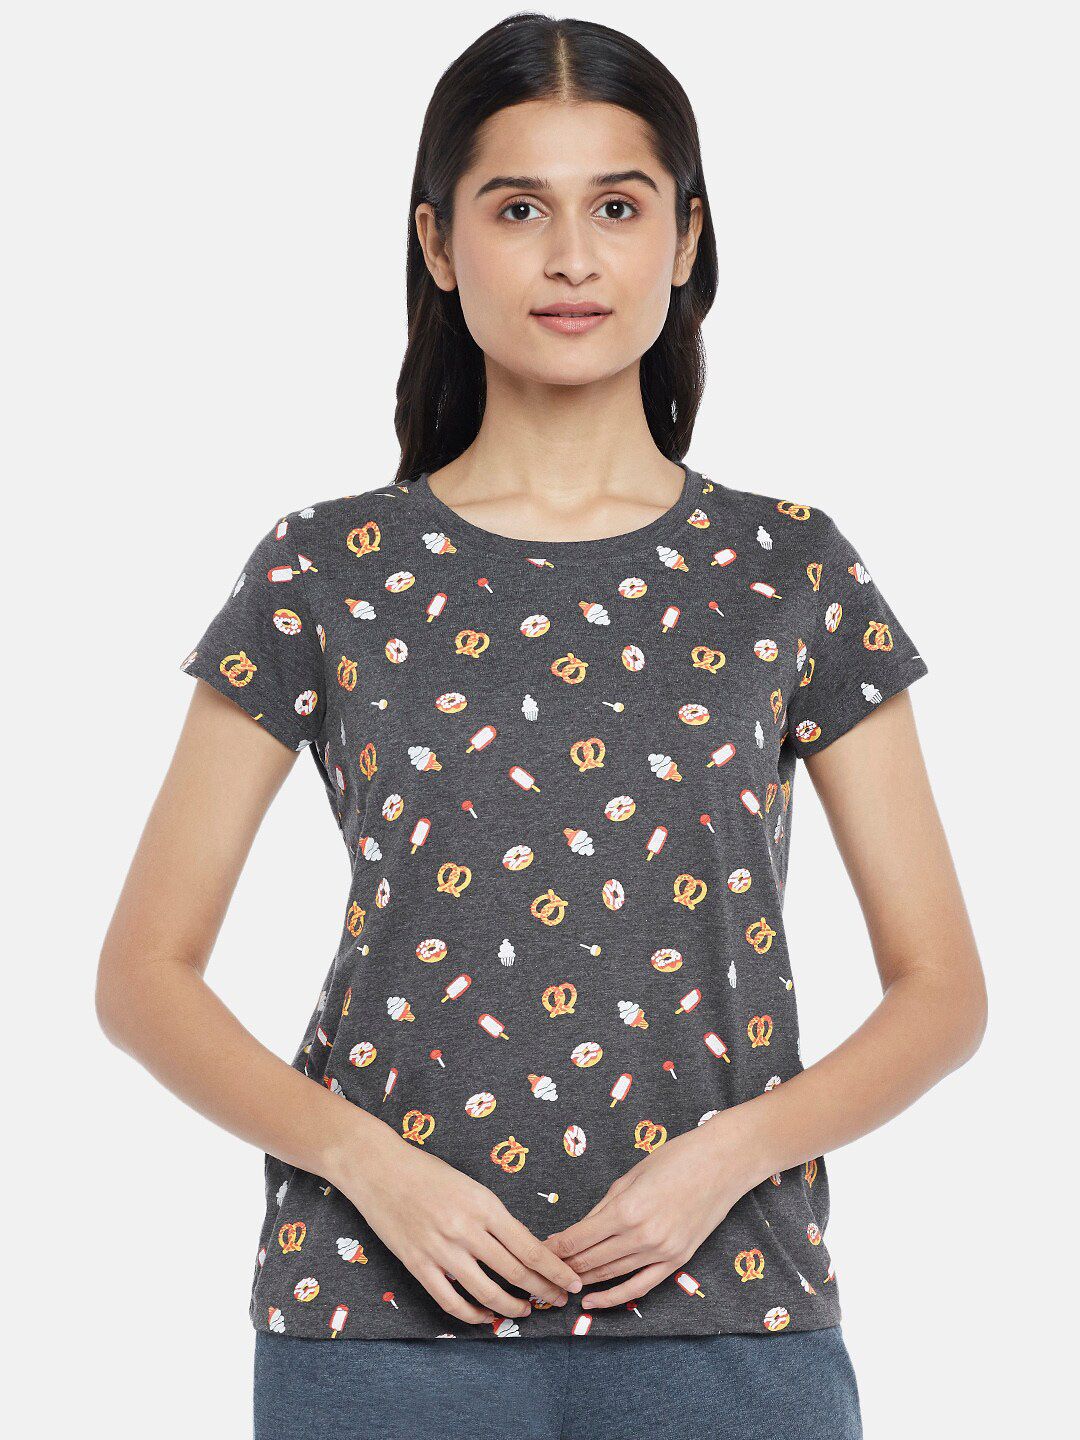 Dreamz by Pantaloons Charcoal Floral Print Lounge tshirt Price in India